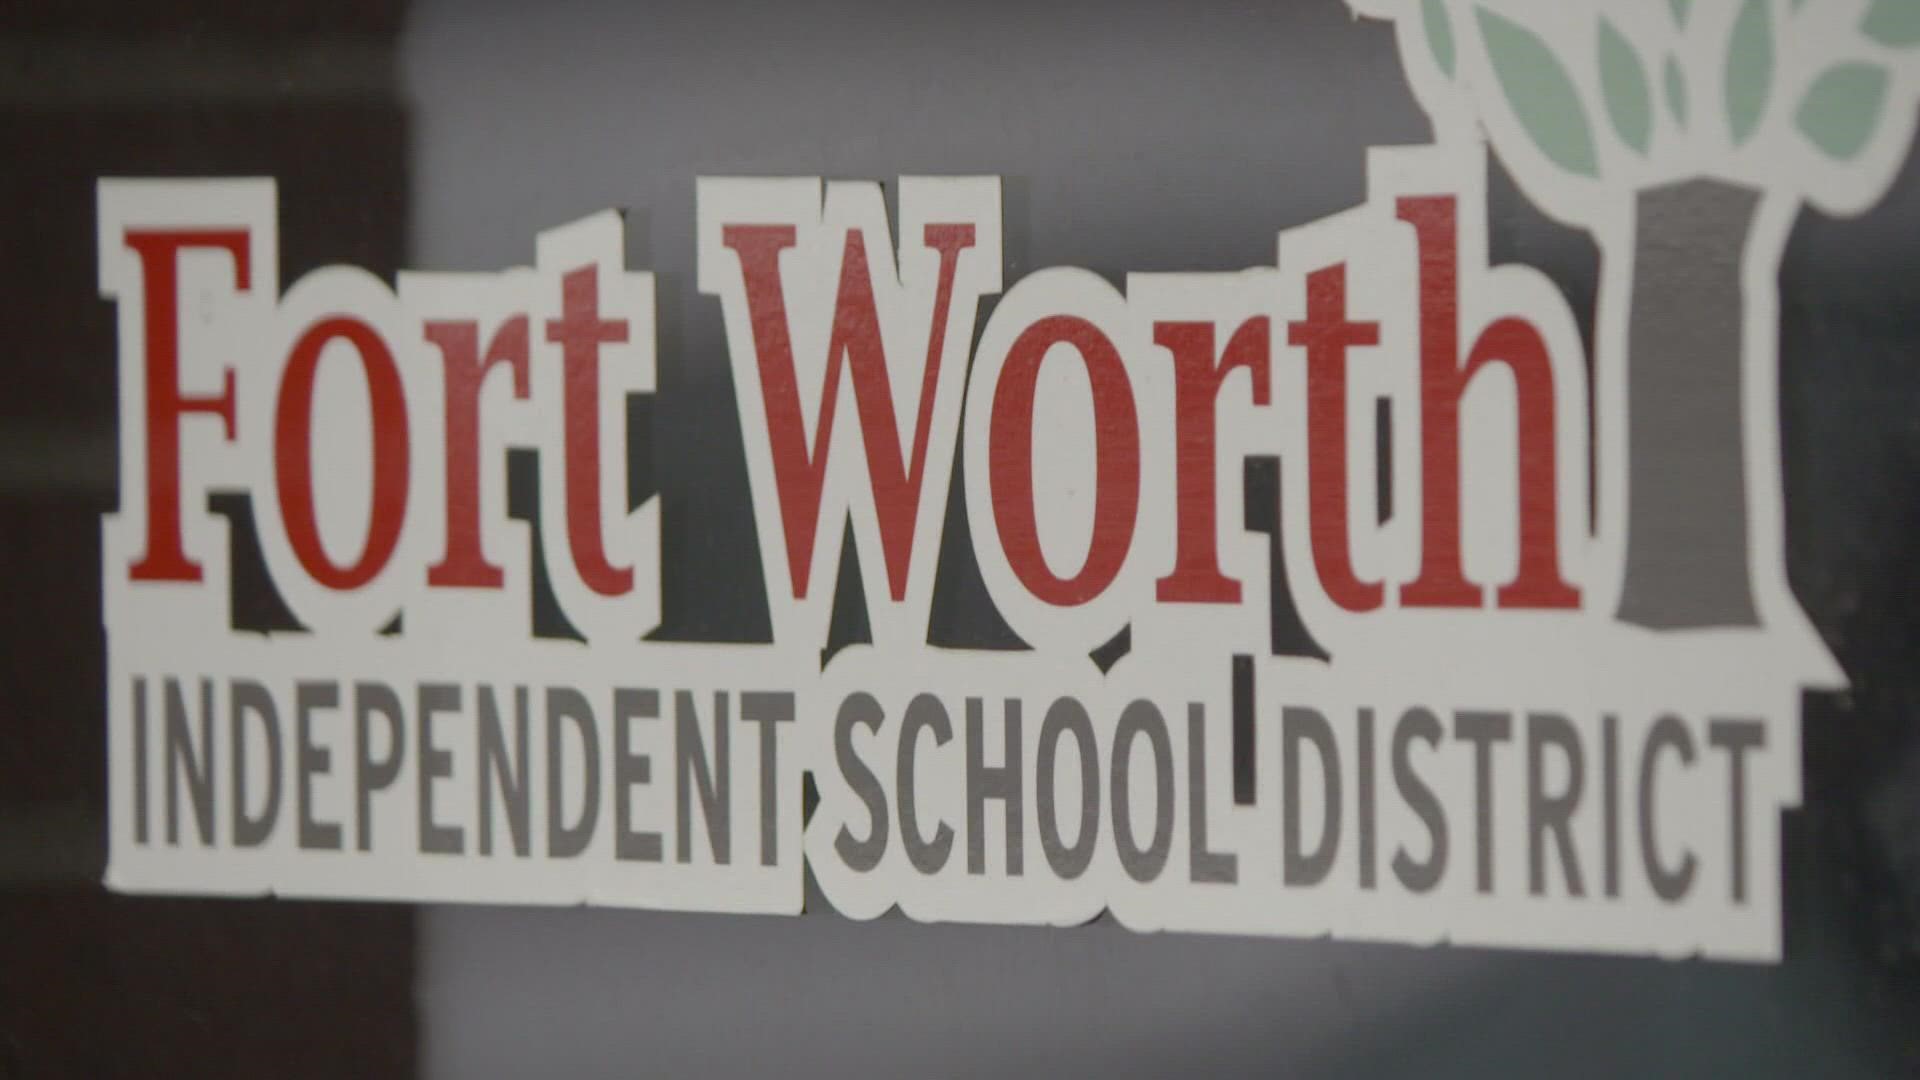 Some North Texas school districts are re-evaluating their security practices after the mass shooting at a Uvalde elementary school.